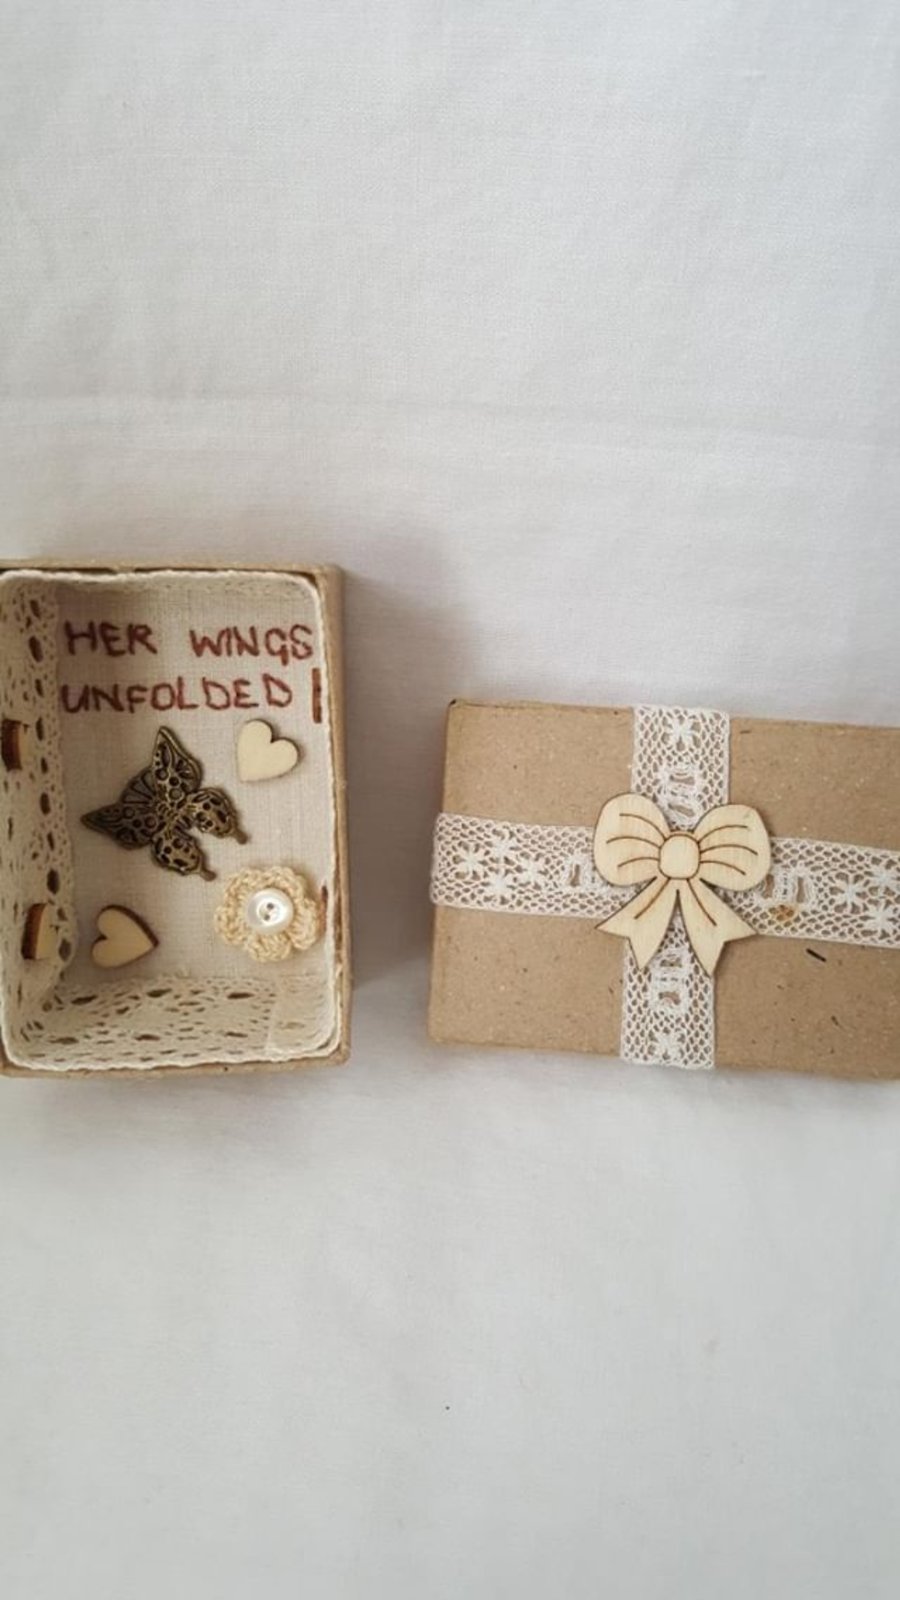 small miniature art diorama with a message 'her wings unfolded'